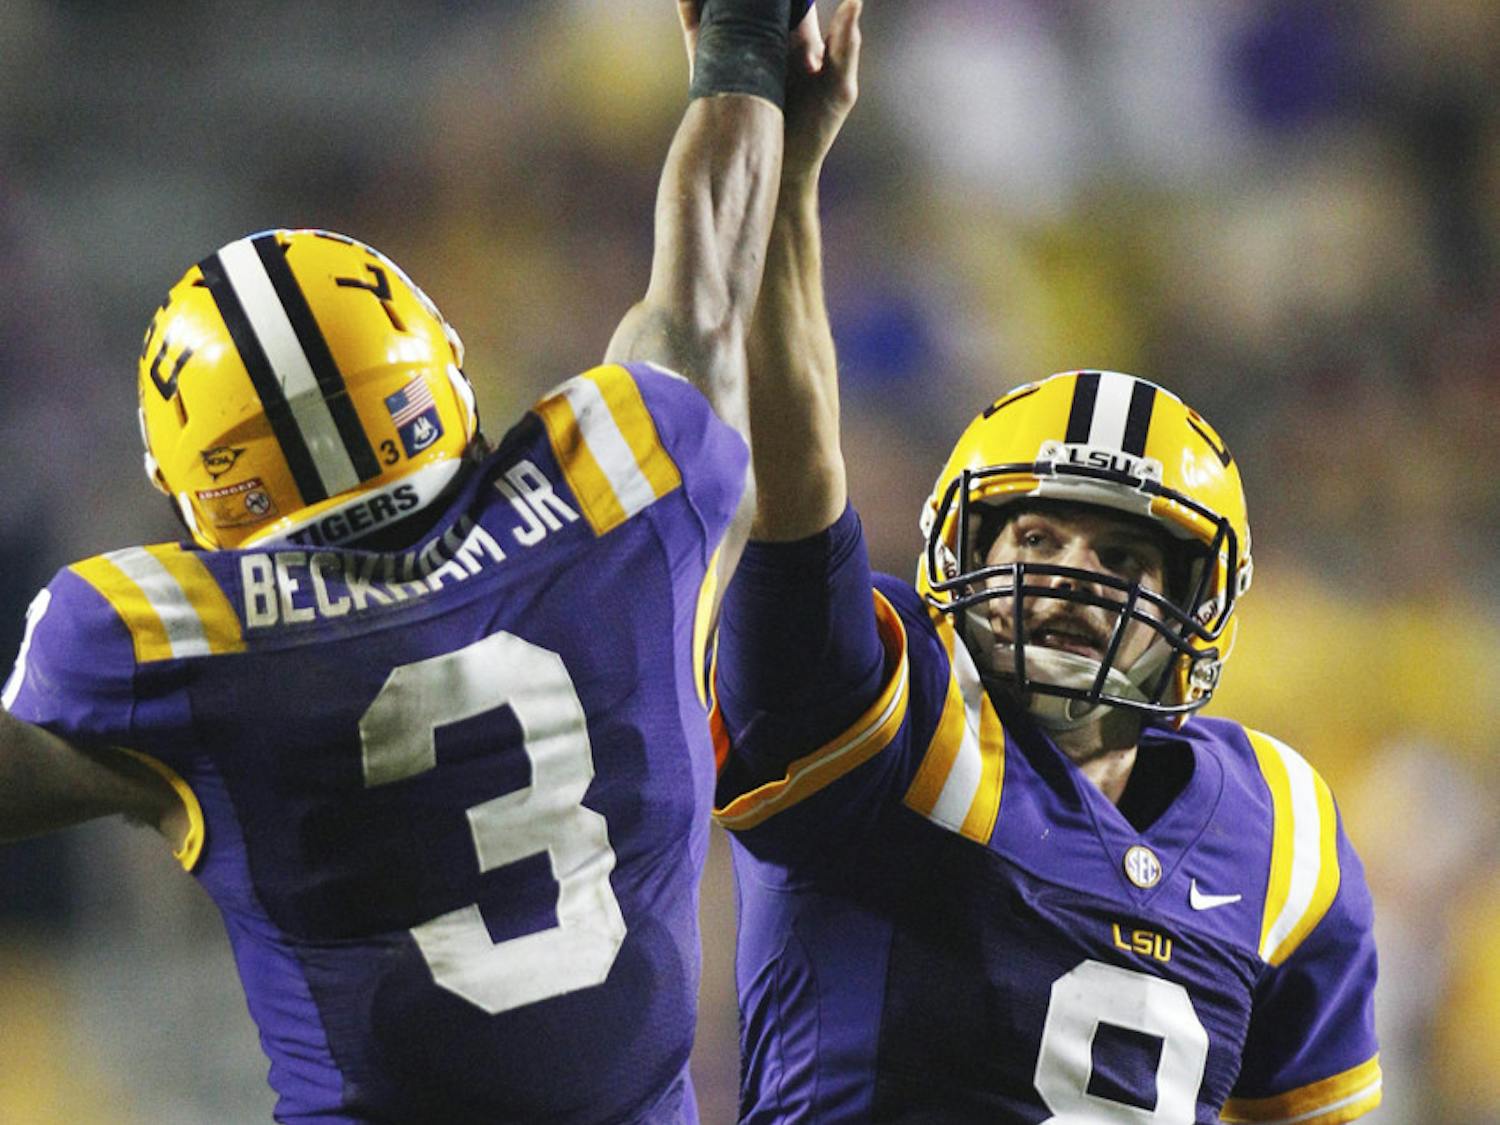 LSU junior quarterback Zach Mettenberger (8) and sophomore wide receiver Odell Beckham (3) congratulate each other after Mettenberger threw Beckham a 53-yard touchdown pass in the second half against Towson on Saturday. The No. 4 Tigers visit the No. 10 Florida Gators this weekend in Ben Hill Griffin Stadium. LSU fumbled five times last week.